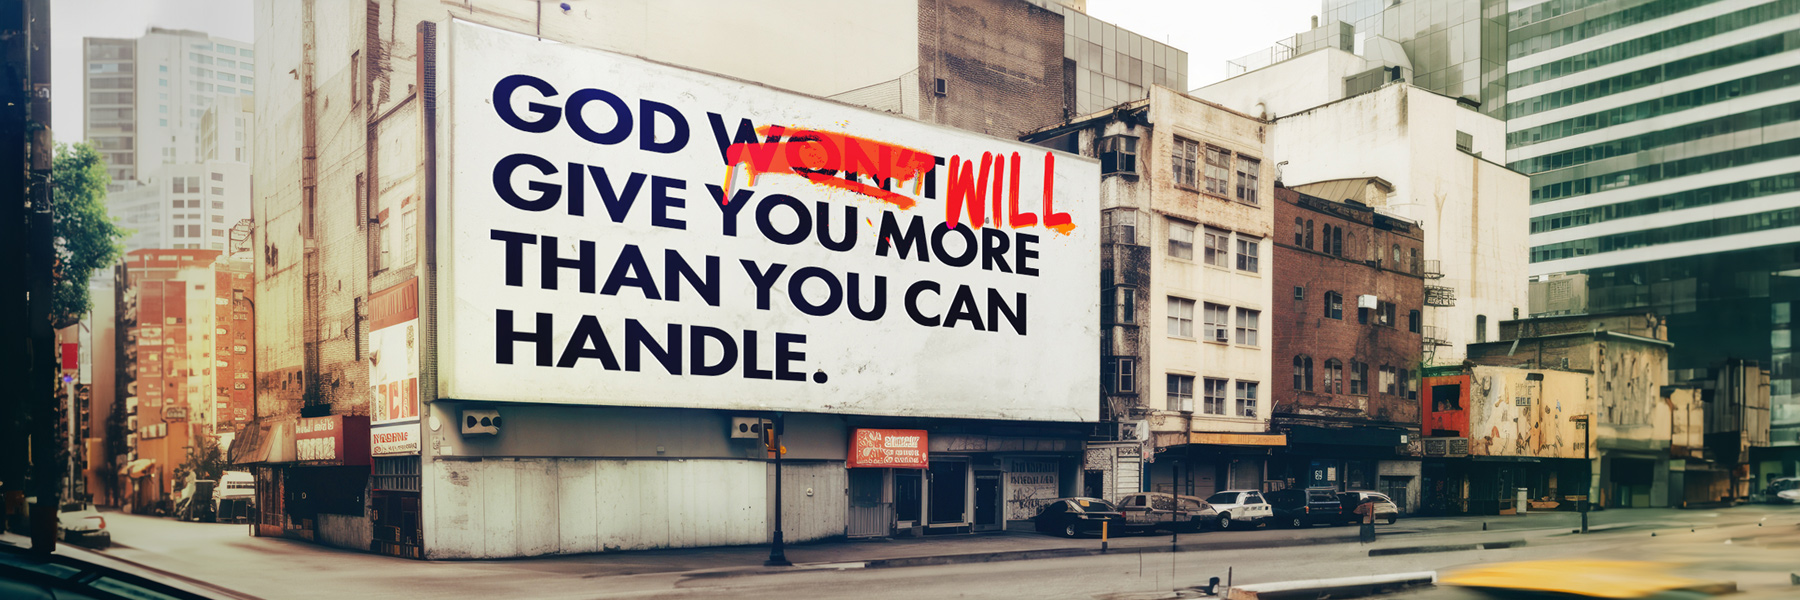 God Will Give You More Than You Can Handle